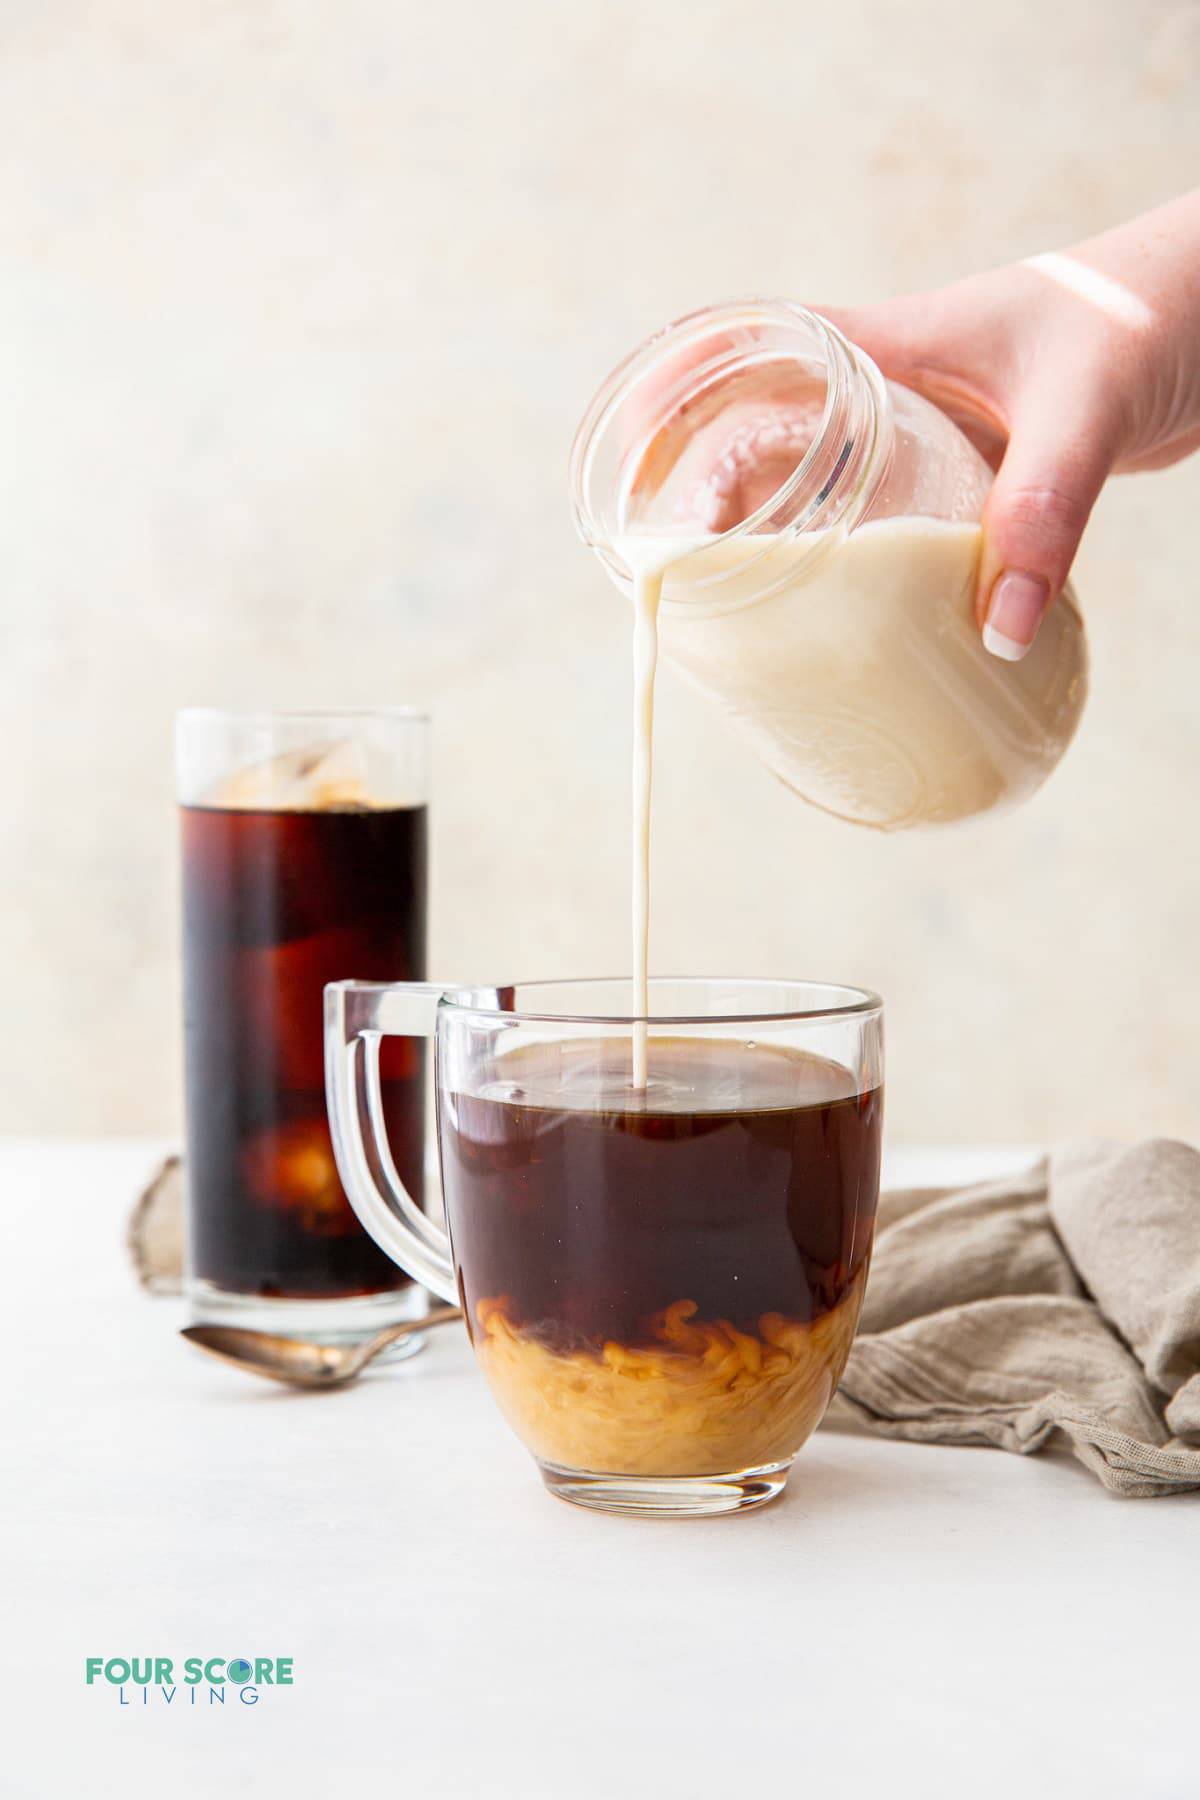 a glass mug of hot coffee with homemade keto creamer being poured in from a mason jar. A clear glass of black iced coffee is in the background